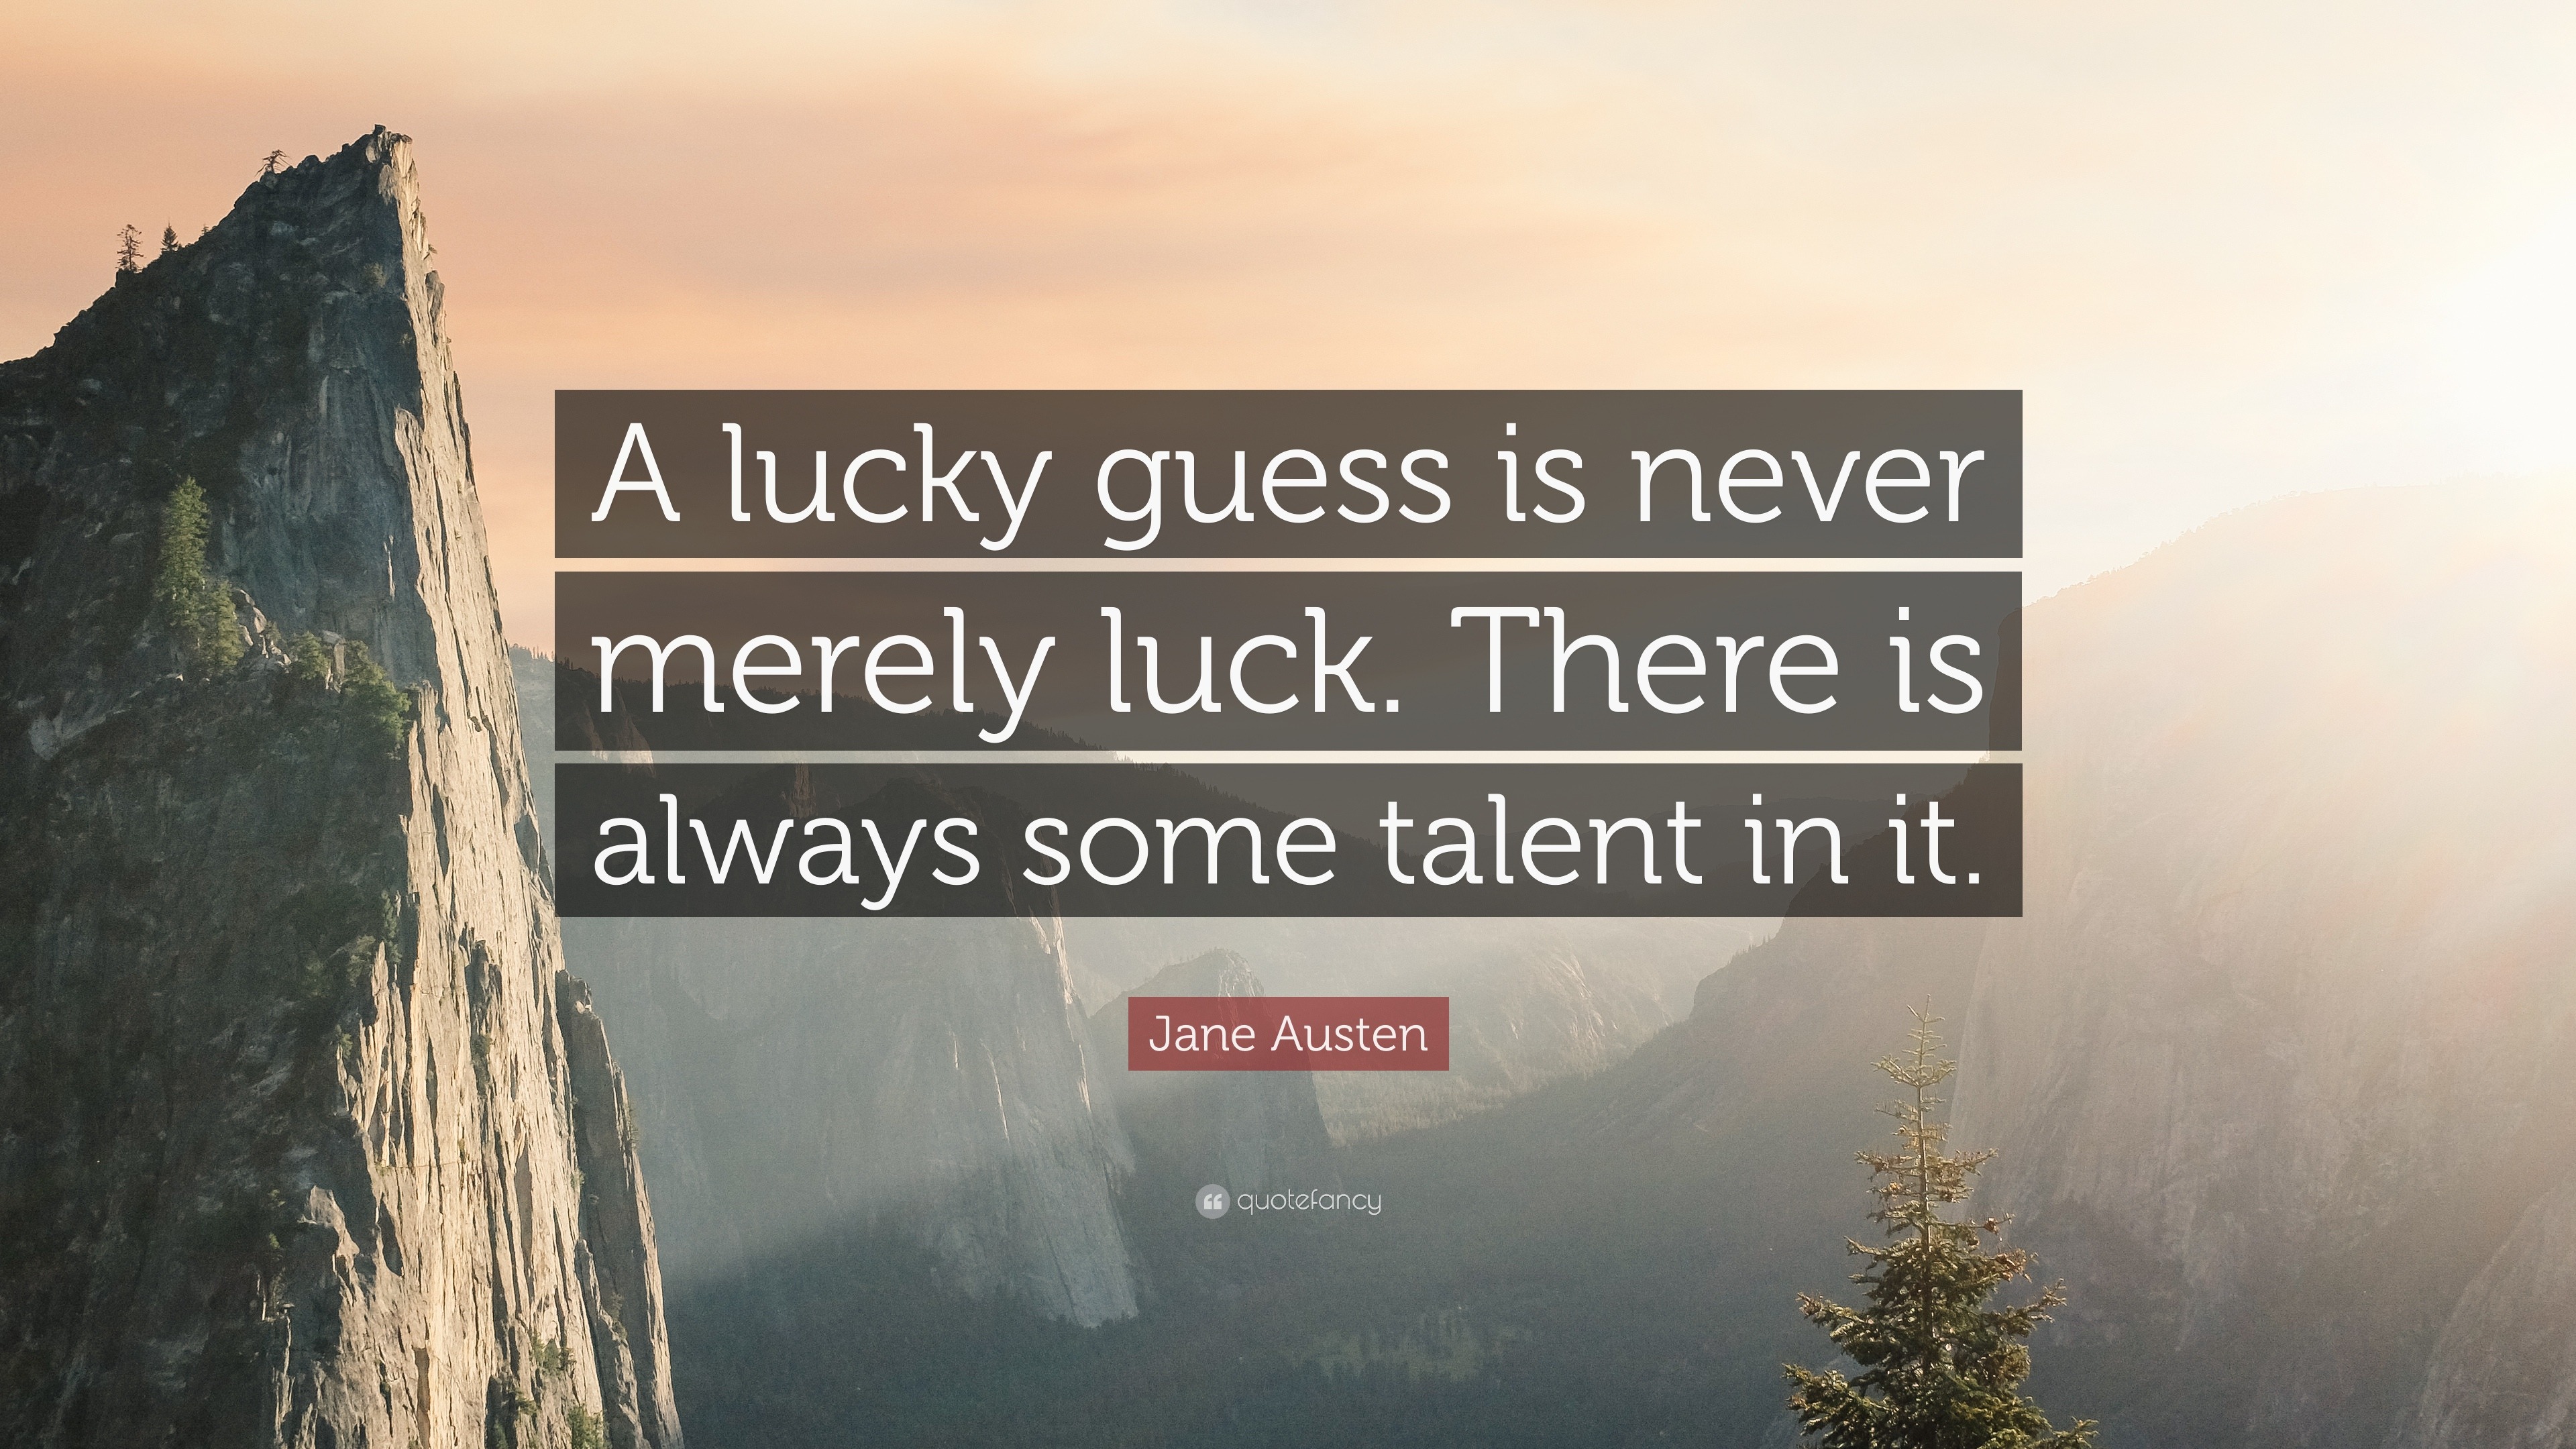 Jane Austen Quote: lucky guess never merely luck. There is always some talent in